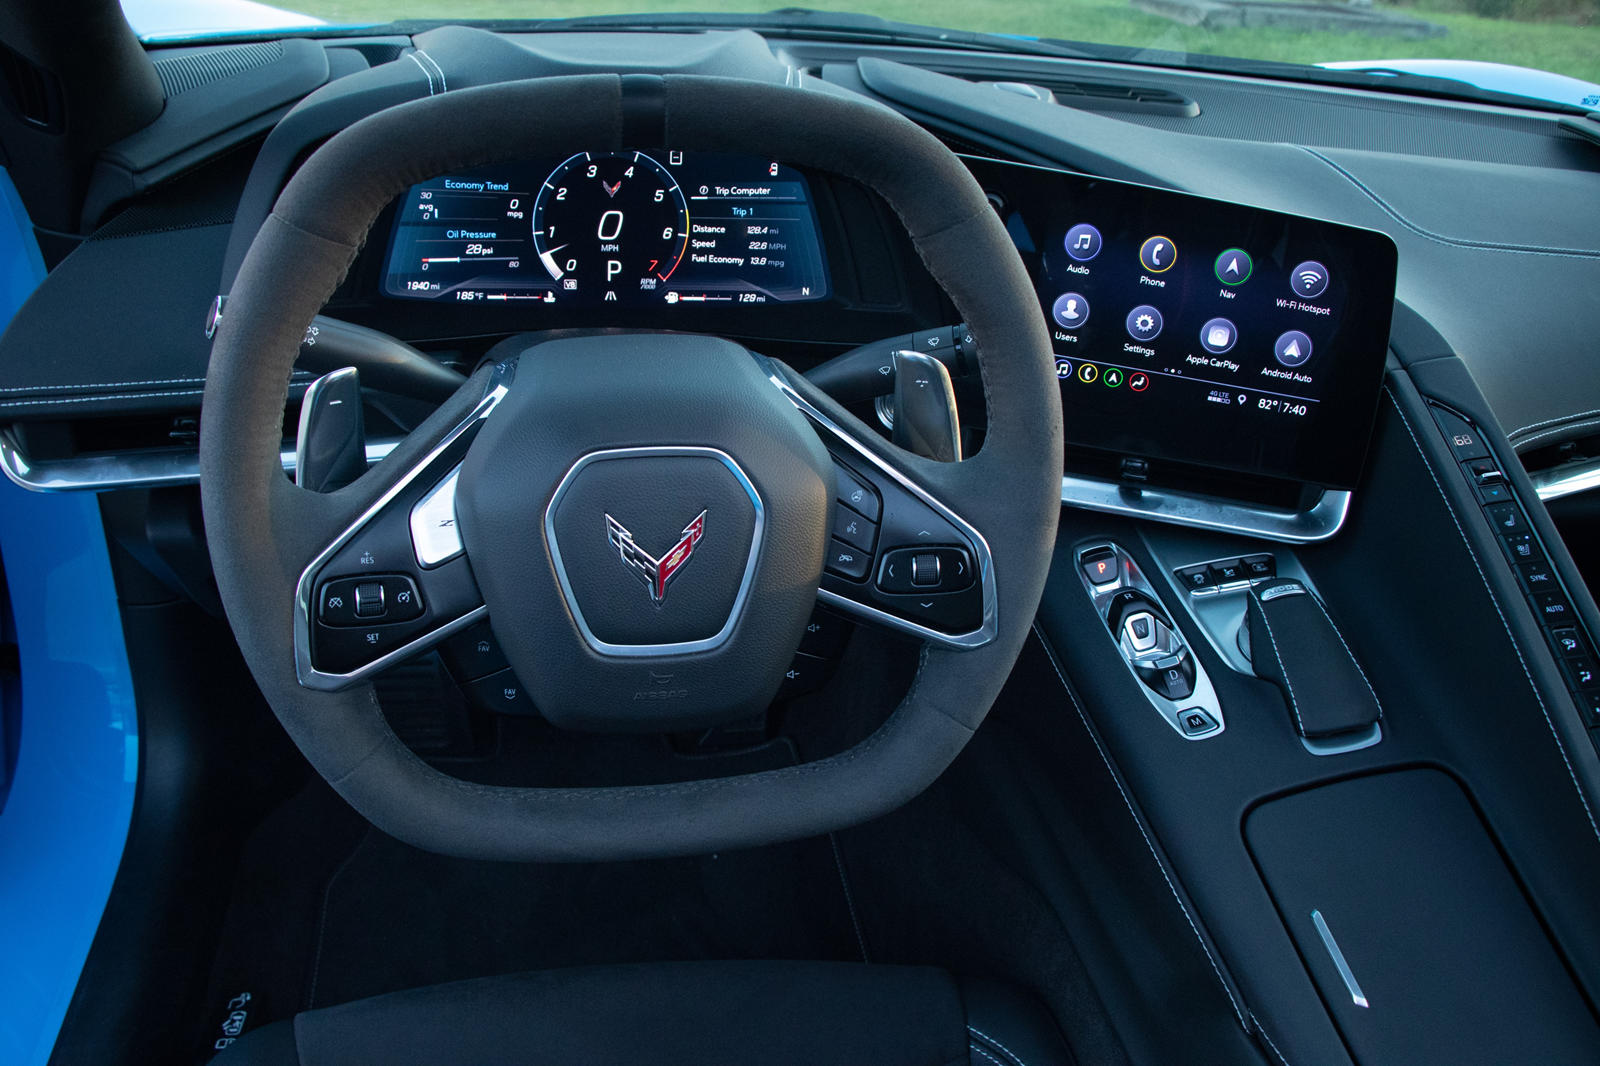 2020 Corvette isn't just super-fast, it's luxury-car quiet and smooth